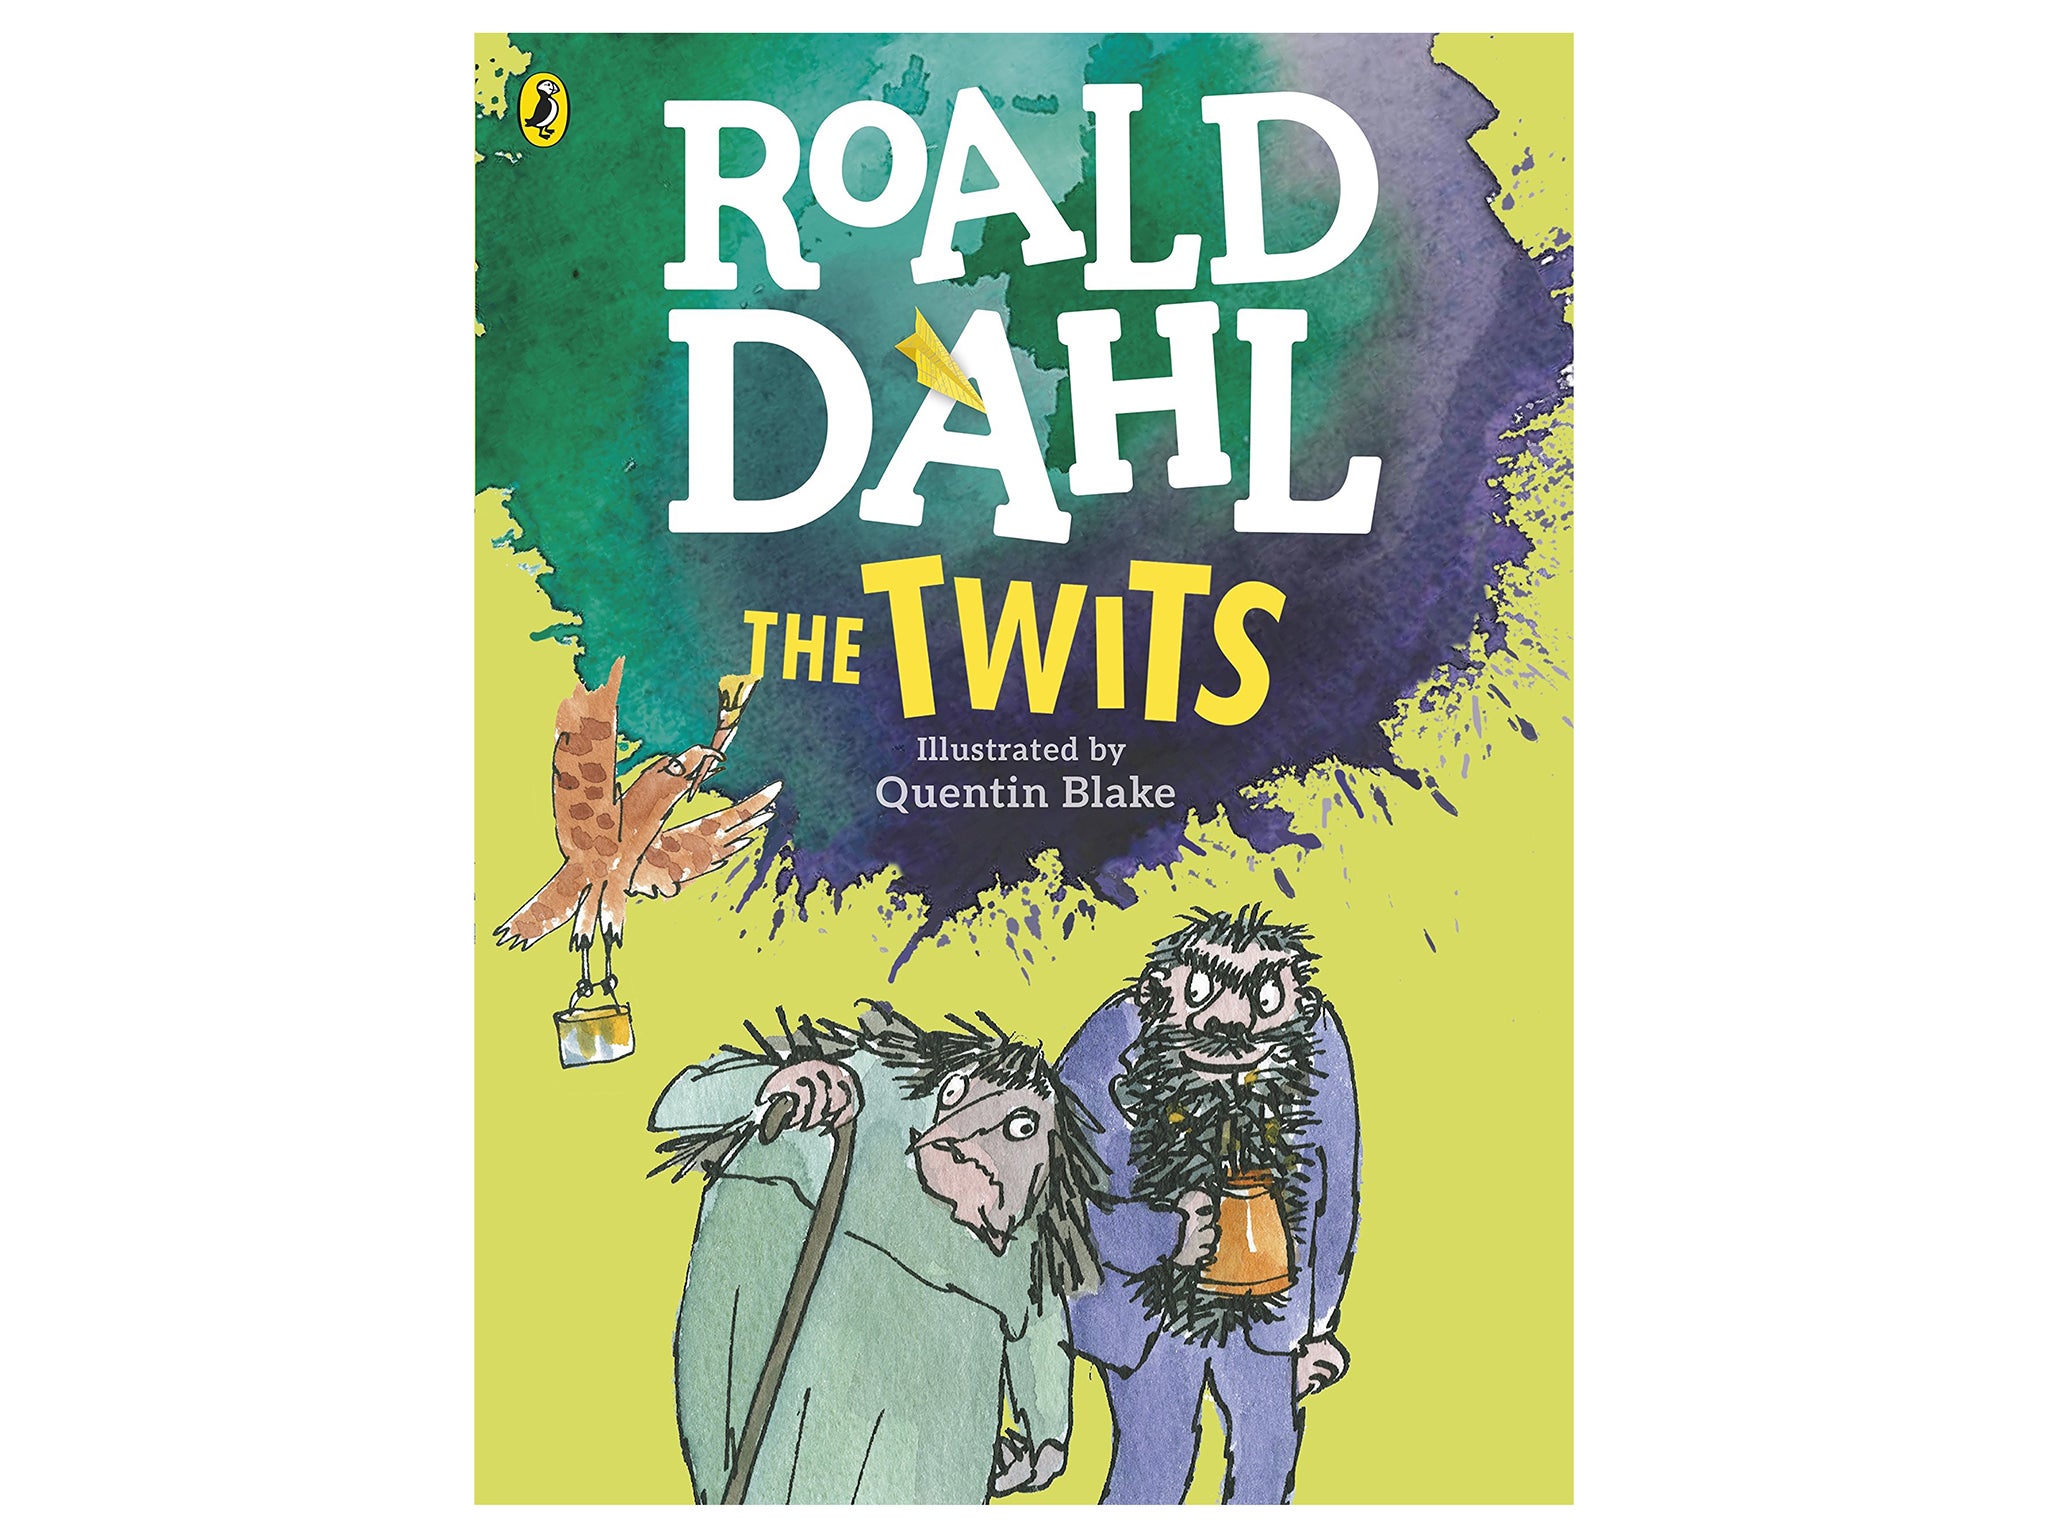 ‘The Twits’ by Roald Dahl day indybest.jpg